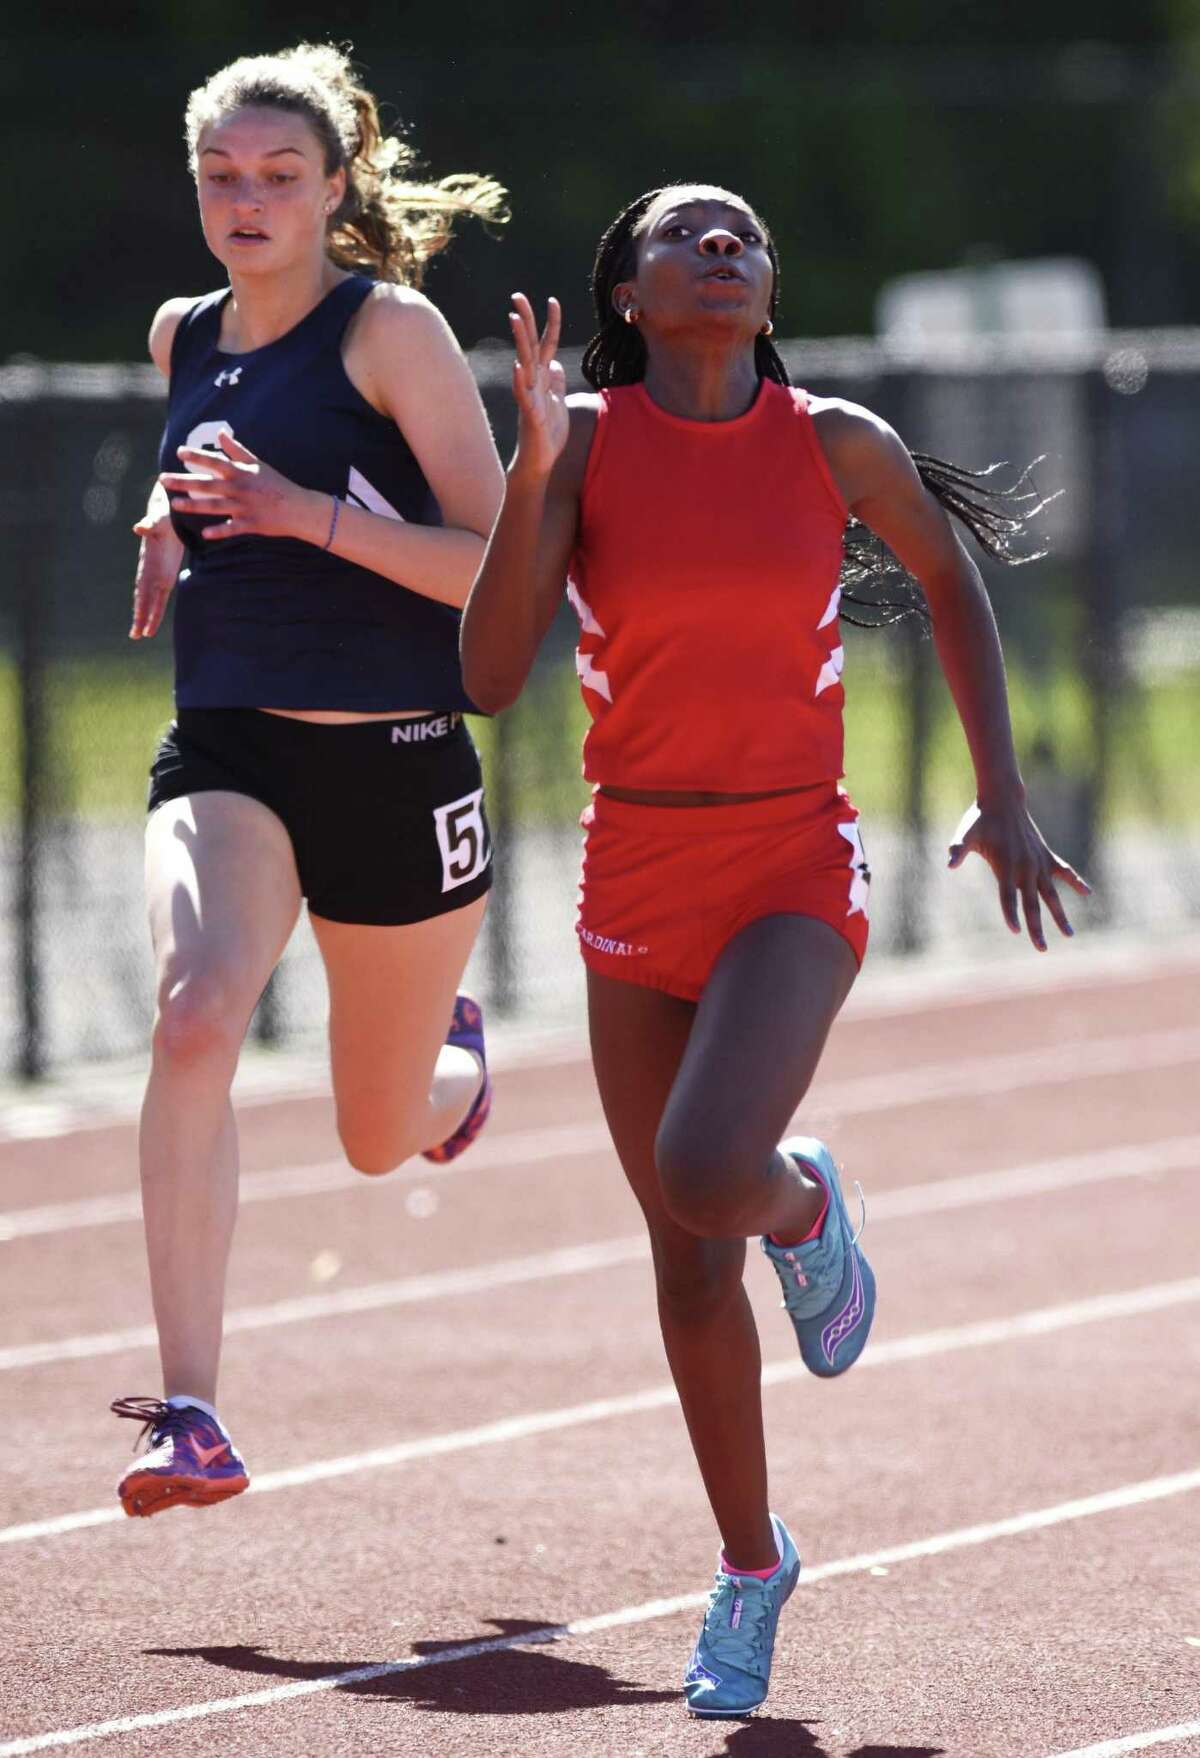 Greenwich freshman Jada Williams pulls away to win the 100 meter dash at the high school girls track and field meet between Greenwich and Staples at Greenwich High School in Greenwich, Conn. Monday, May 15, 2017.